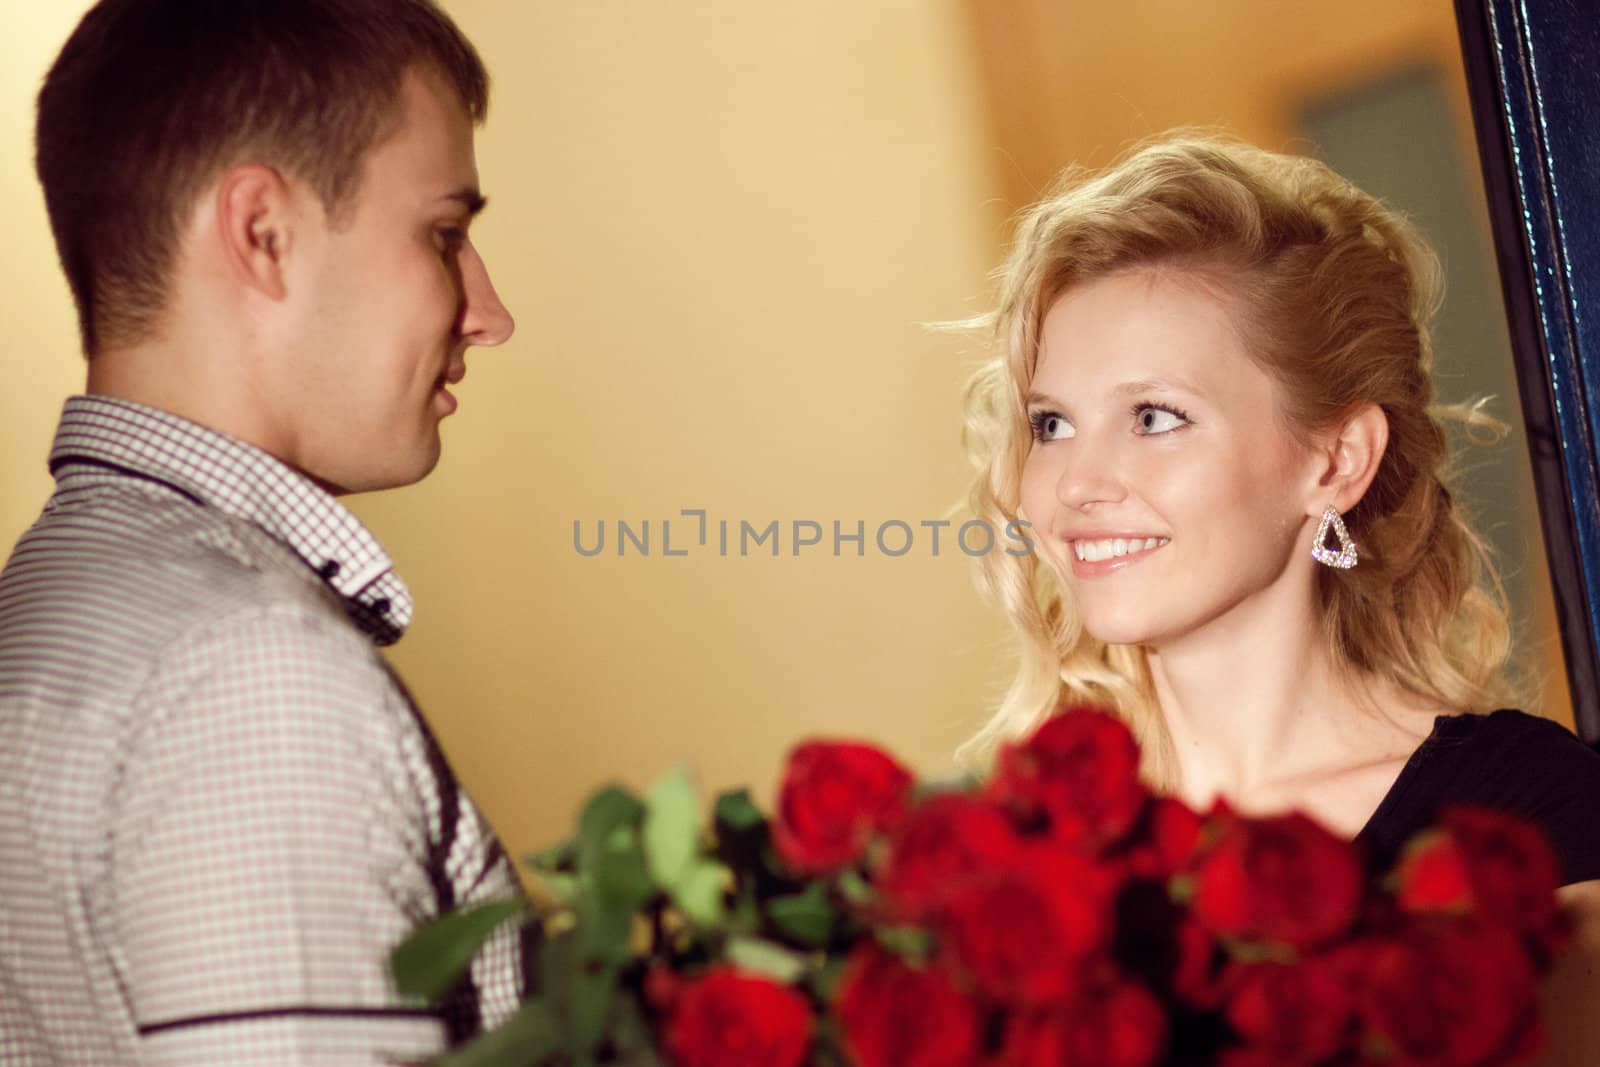 man gives roses to a girl by vsurkov